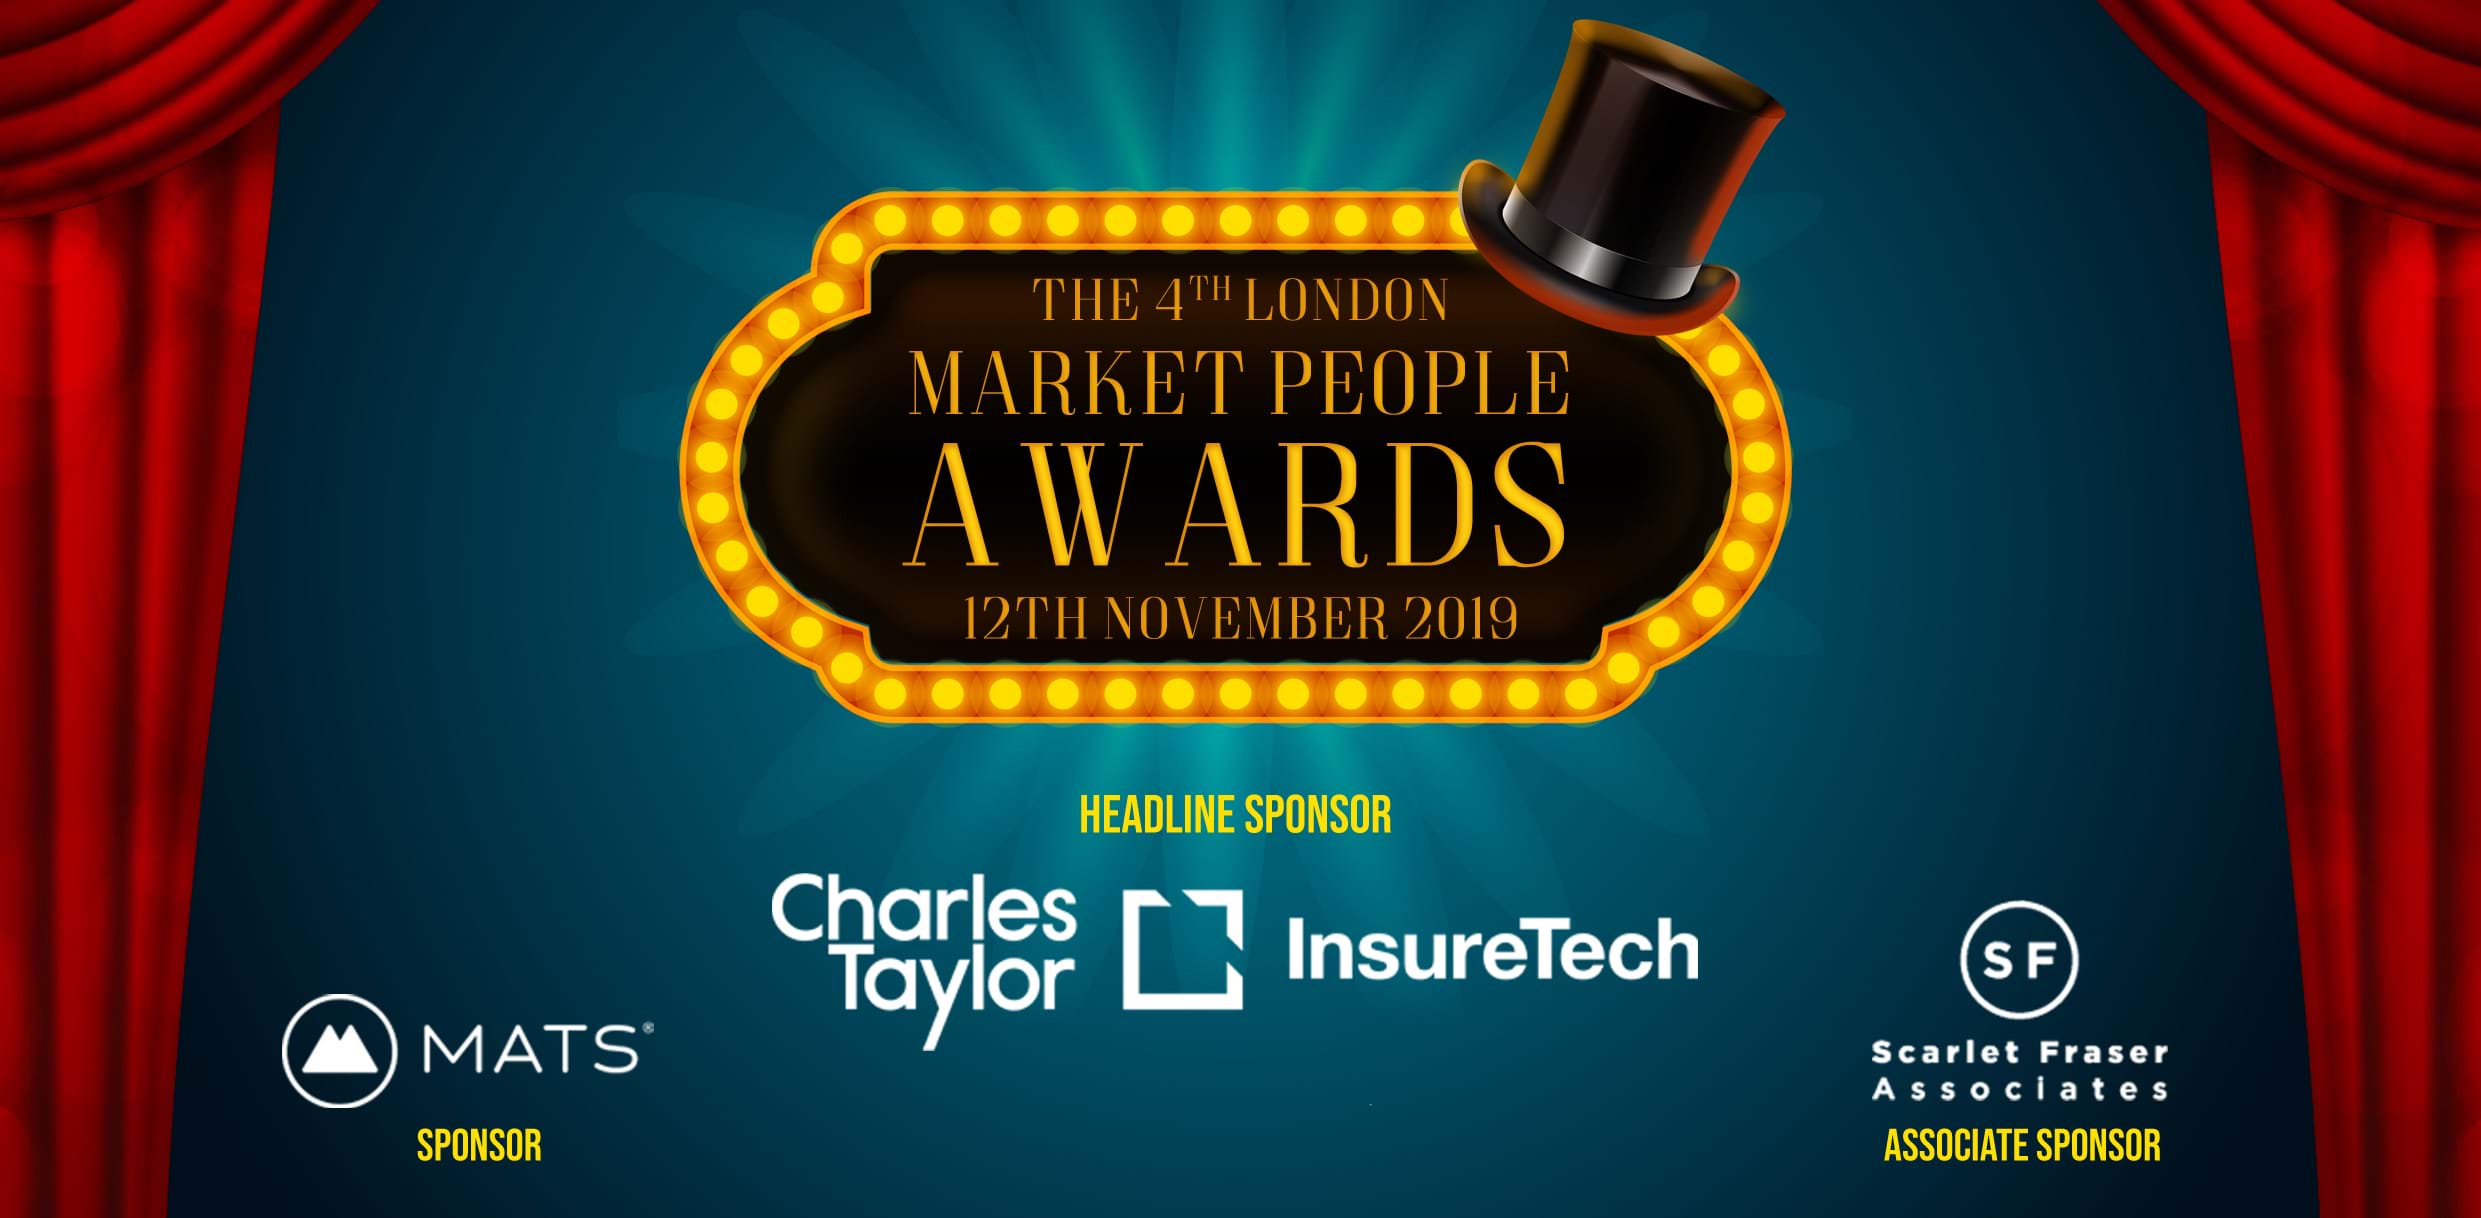 The 4th London Market People Awards